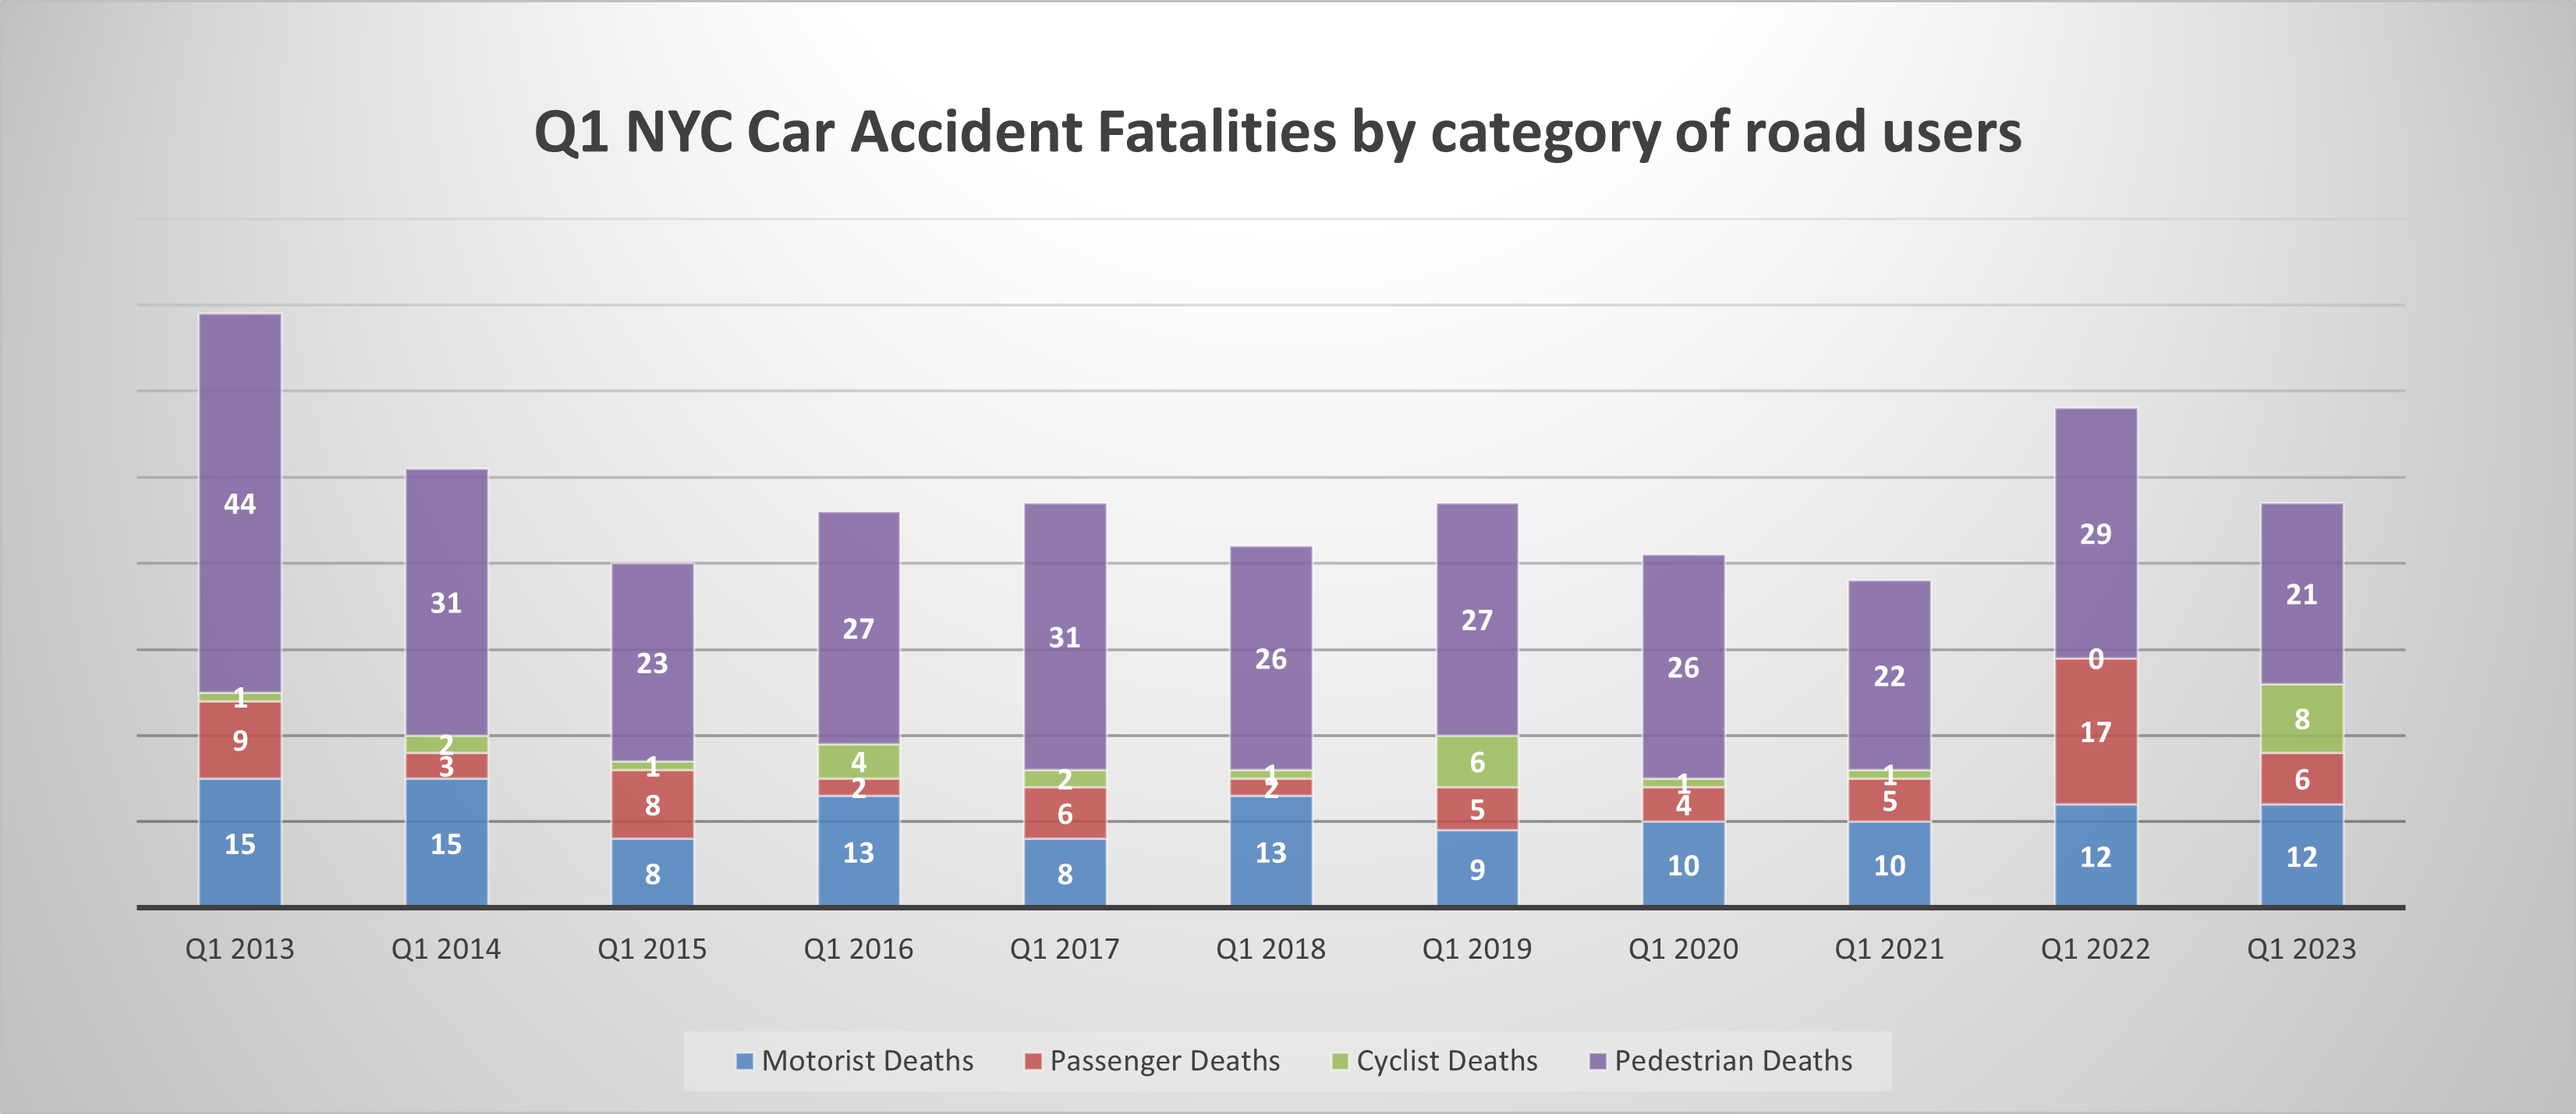 New York car accident deaths by road users Q1 2023